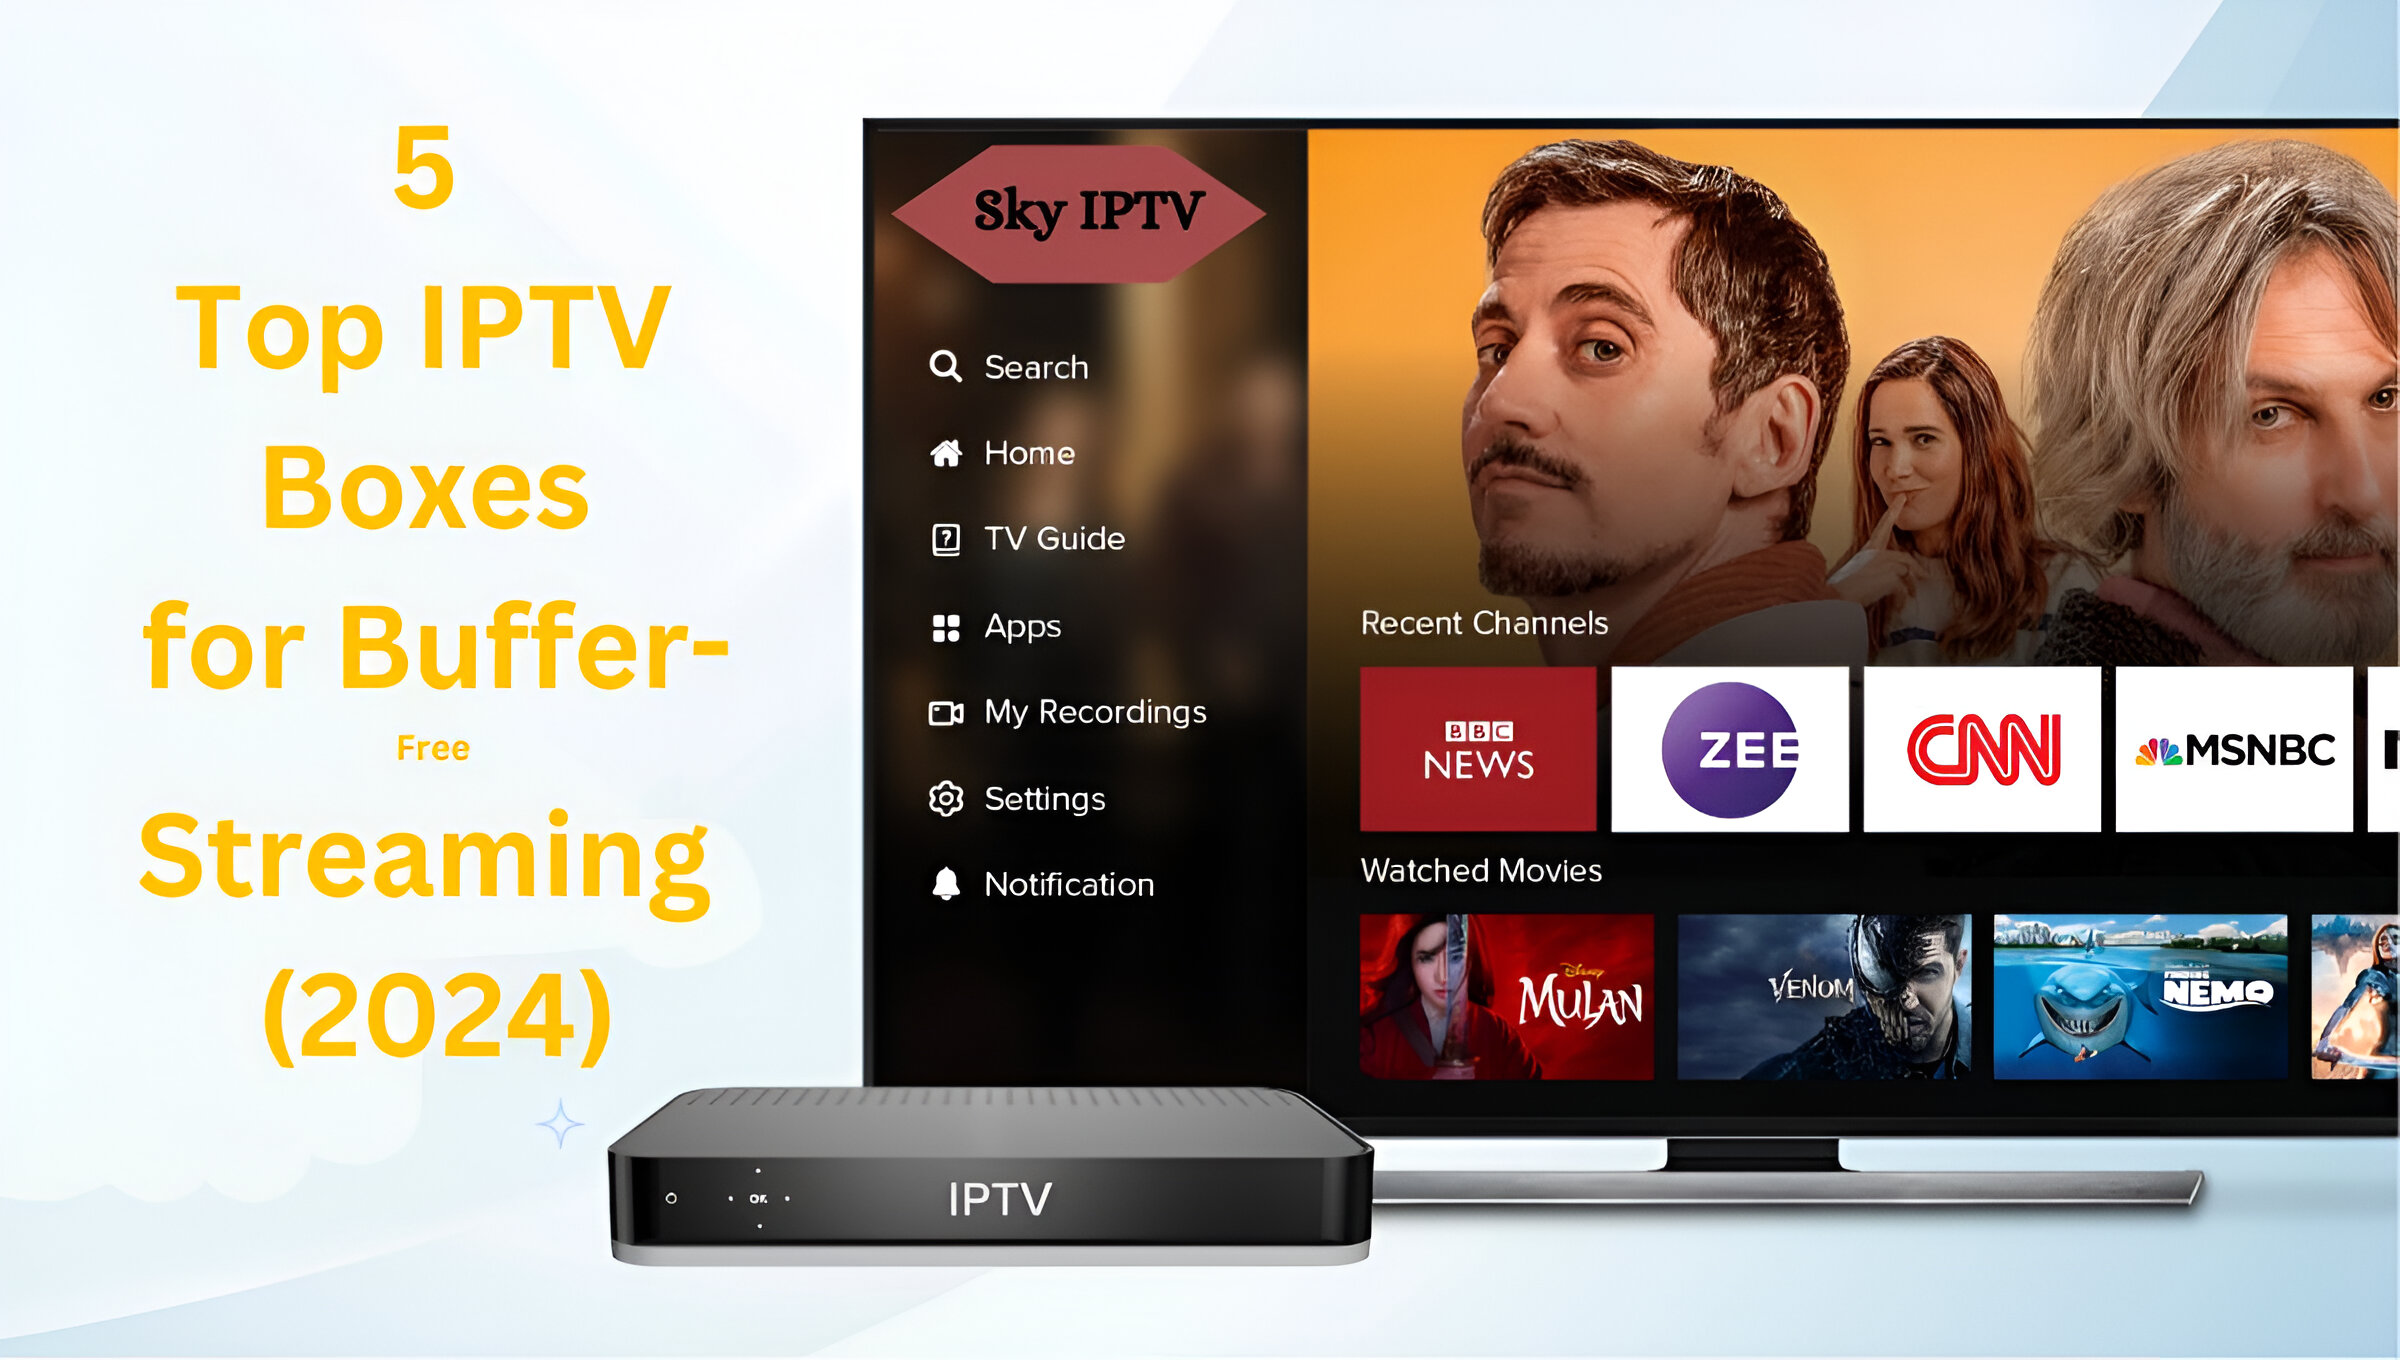 5 Top IPTV Boxes for Buffer-Free Streaming (2024)